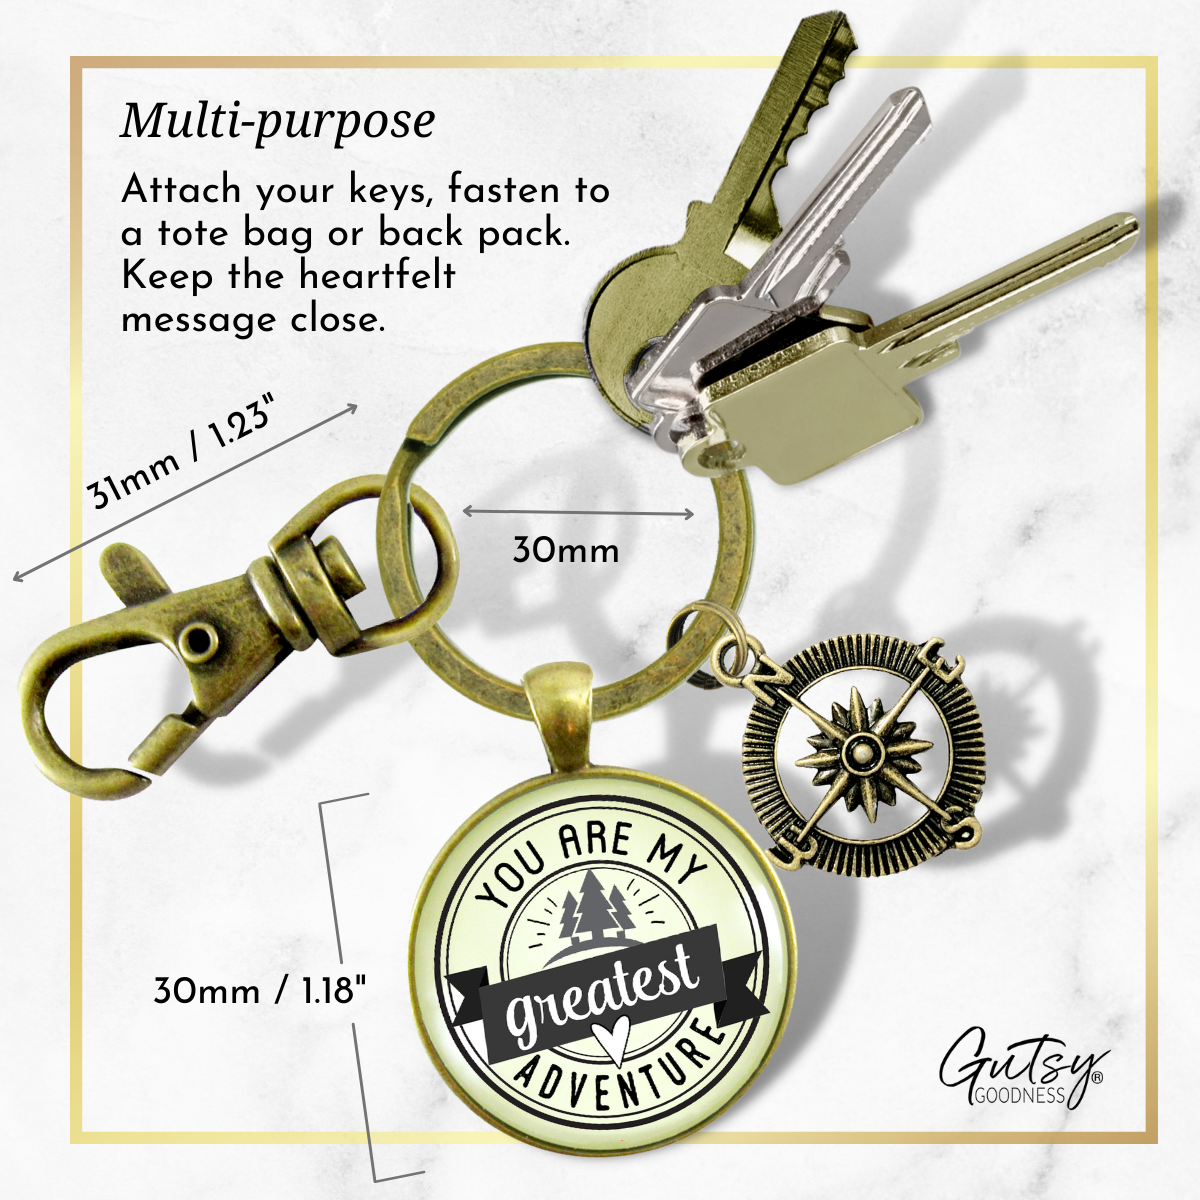 You are My Greatest Adventure Compass Keychain Romantic Couple Gift  Keychain - Unisex - Gutsy Goodness Handmade Jewelry